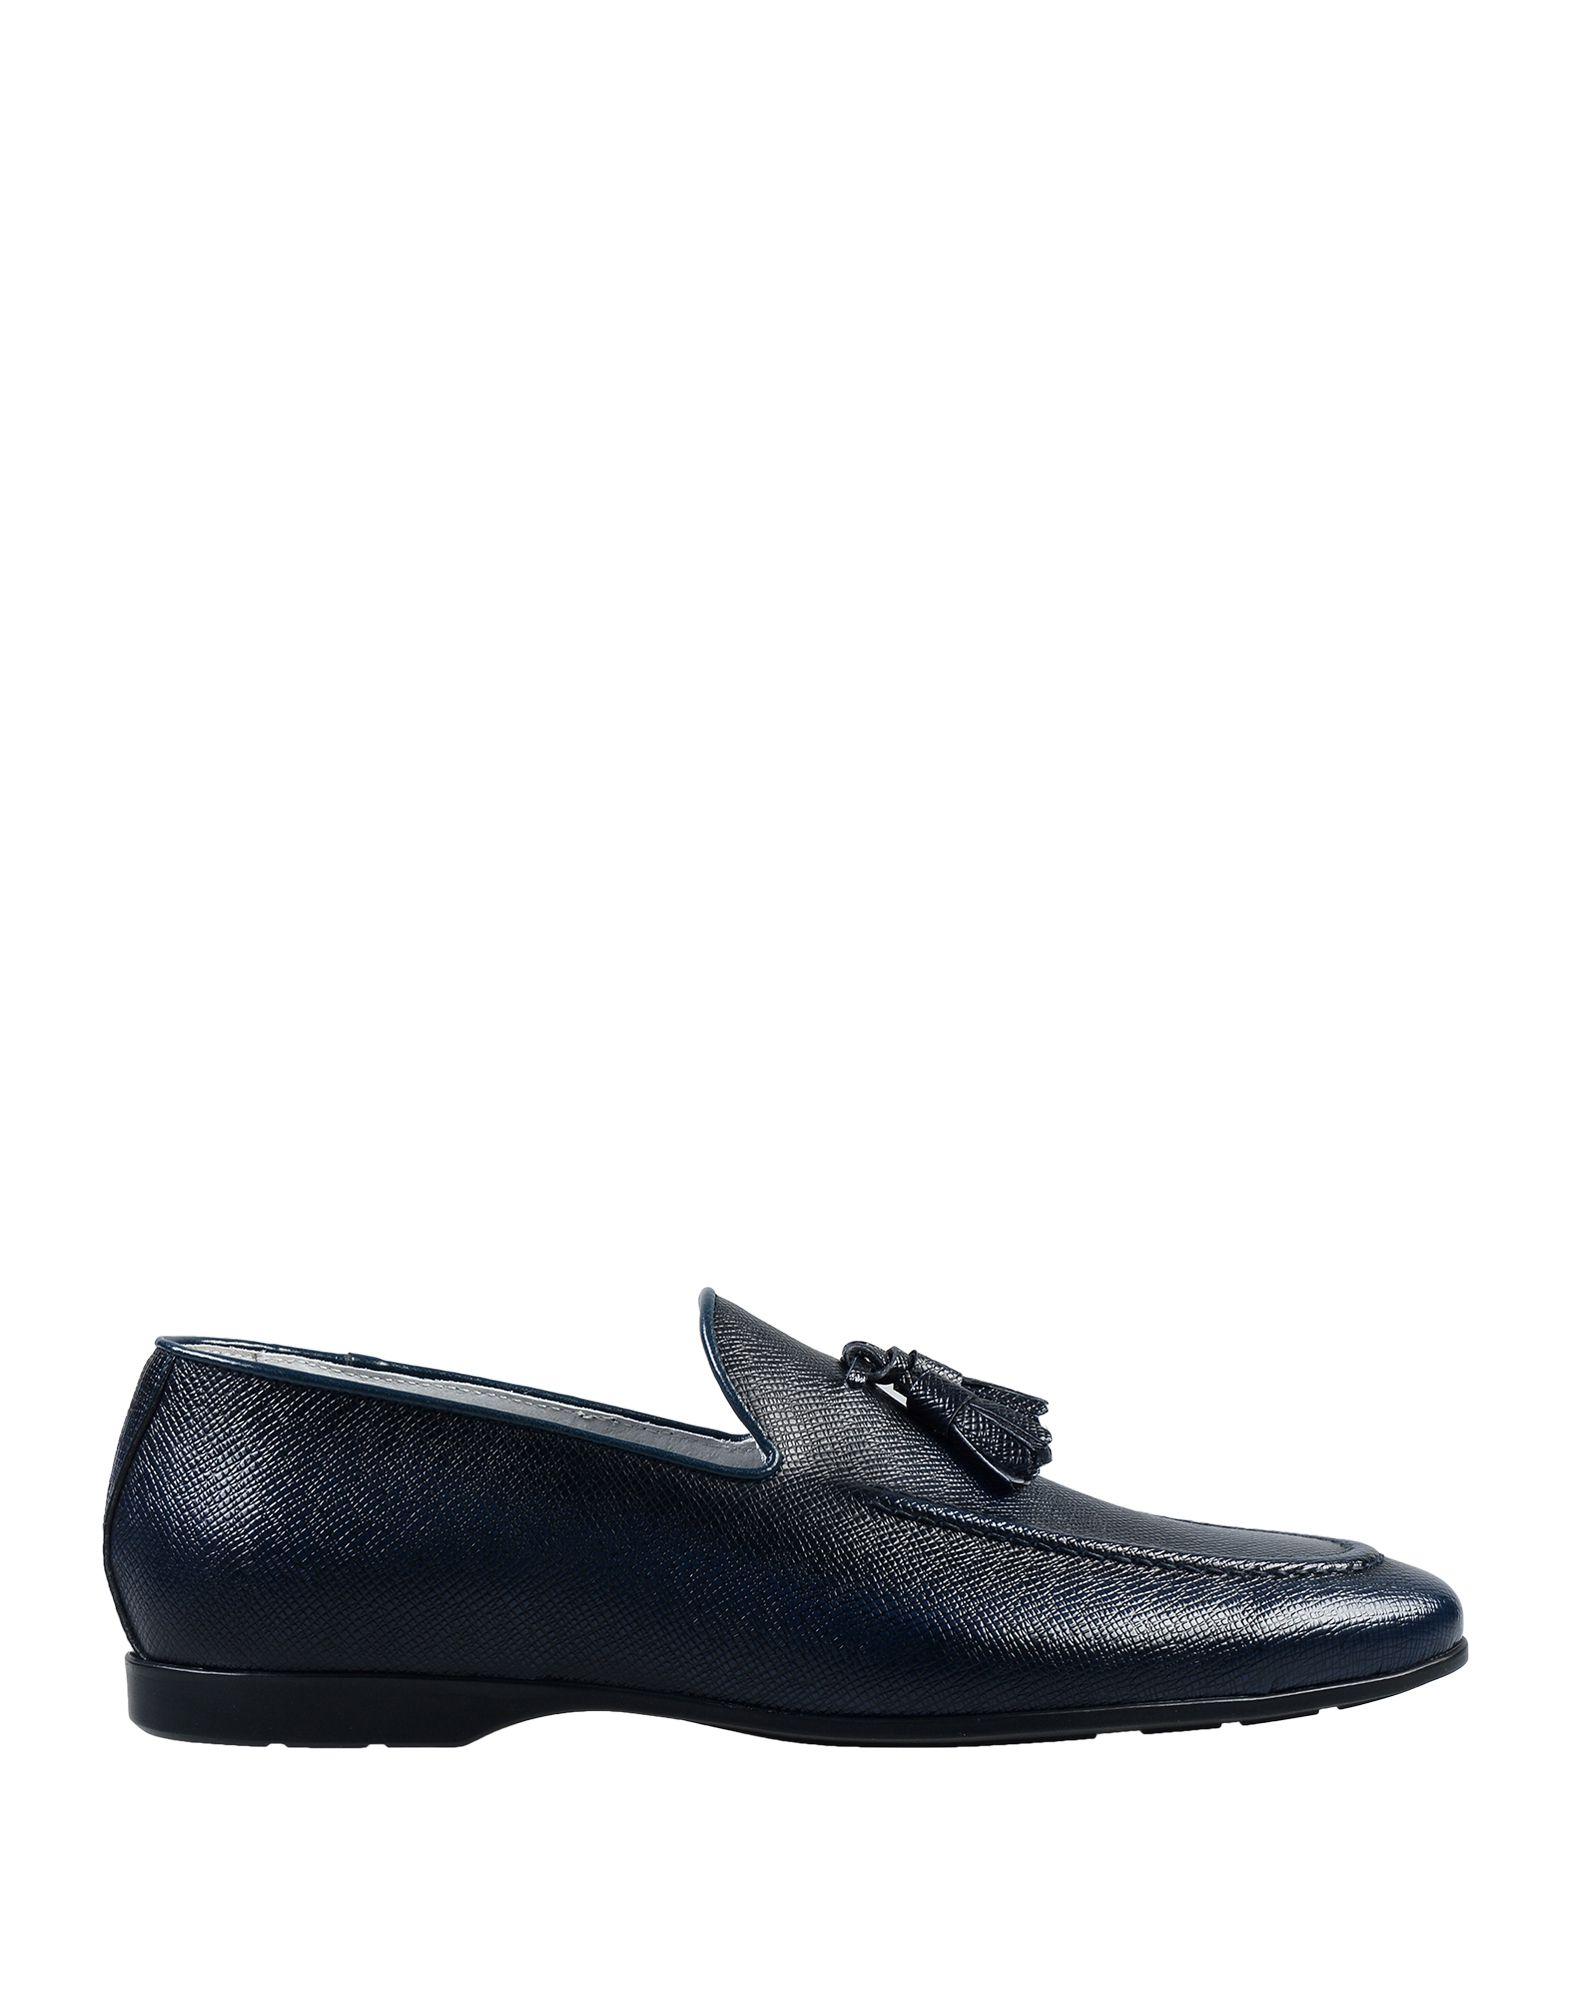 Fabiano Ricci Leather Loafer in Dark Blue (Blue) for Men - Lyst